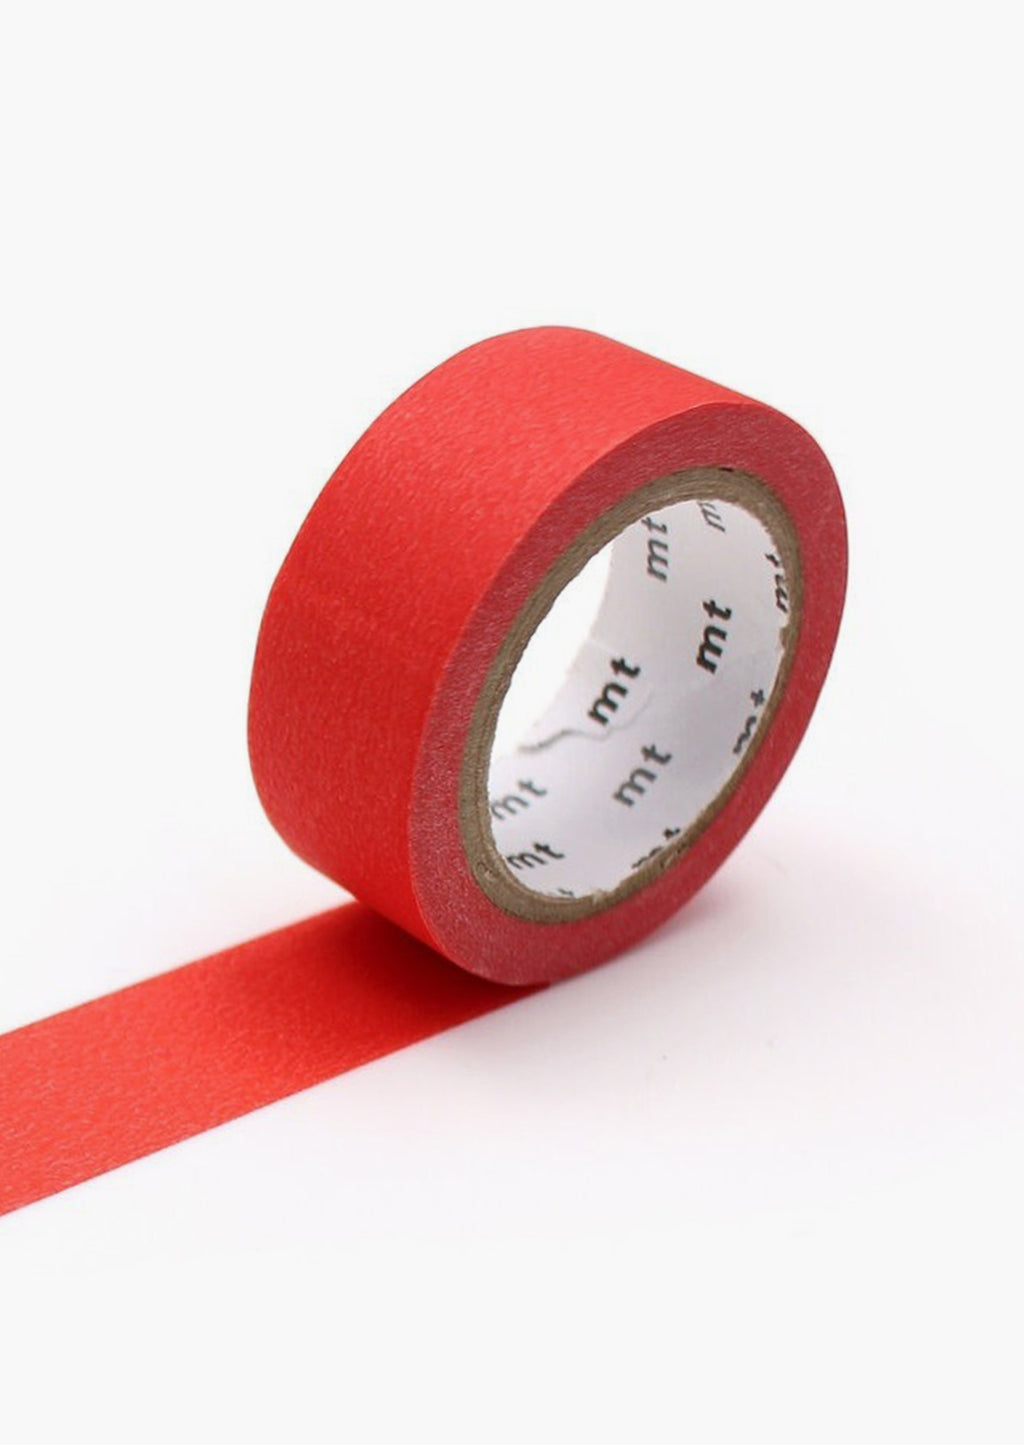 Cherry: A roll of washi tape in red cherry color.